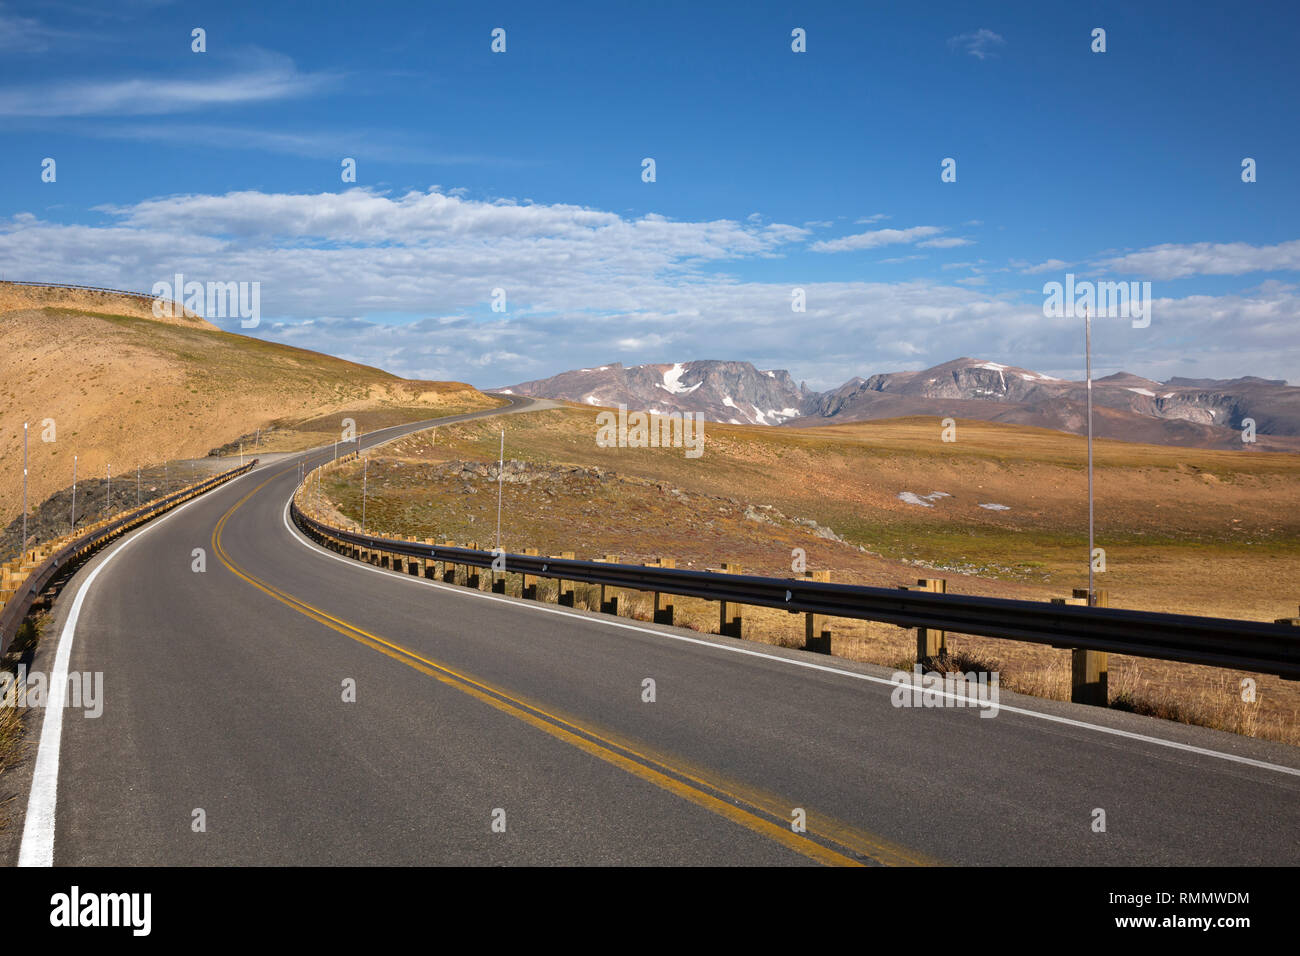 WY03725-00...WYOMING - la Beartooth Highway sul lato est di Beartooth Pass in Shoshone National Forest. Foto Stock